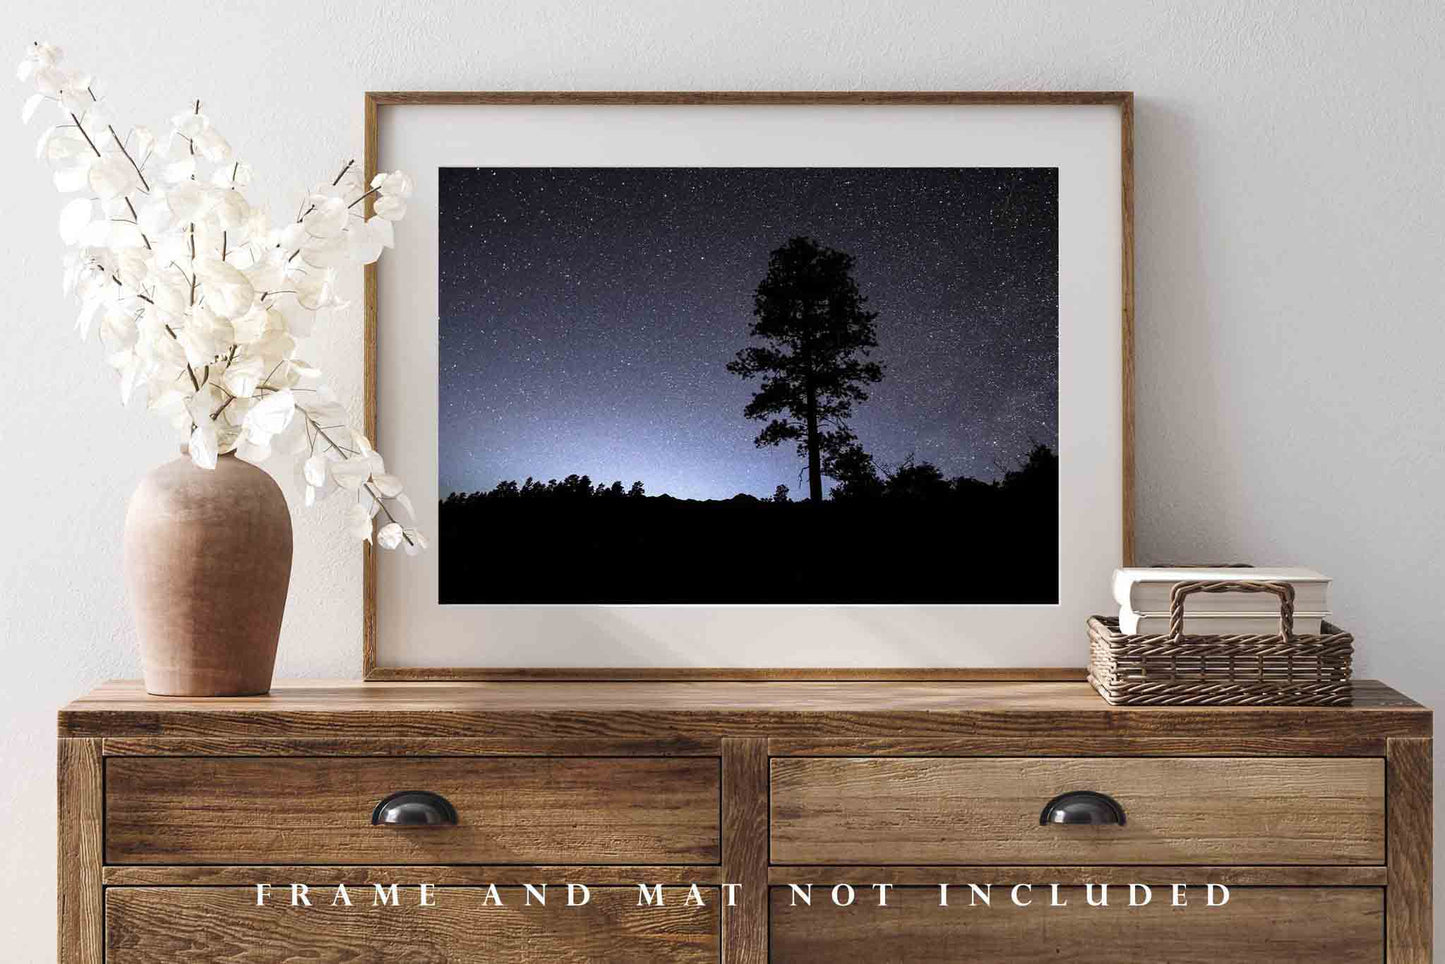 Night Sky Wall Art Photography Print - Picture of Tree and Mountain Silhouettes Against Starry Sky in Colorado Celestial Photo Artwork Decor